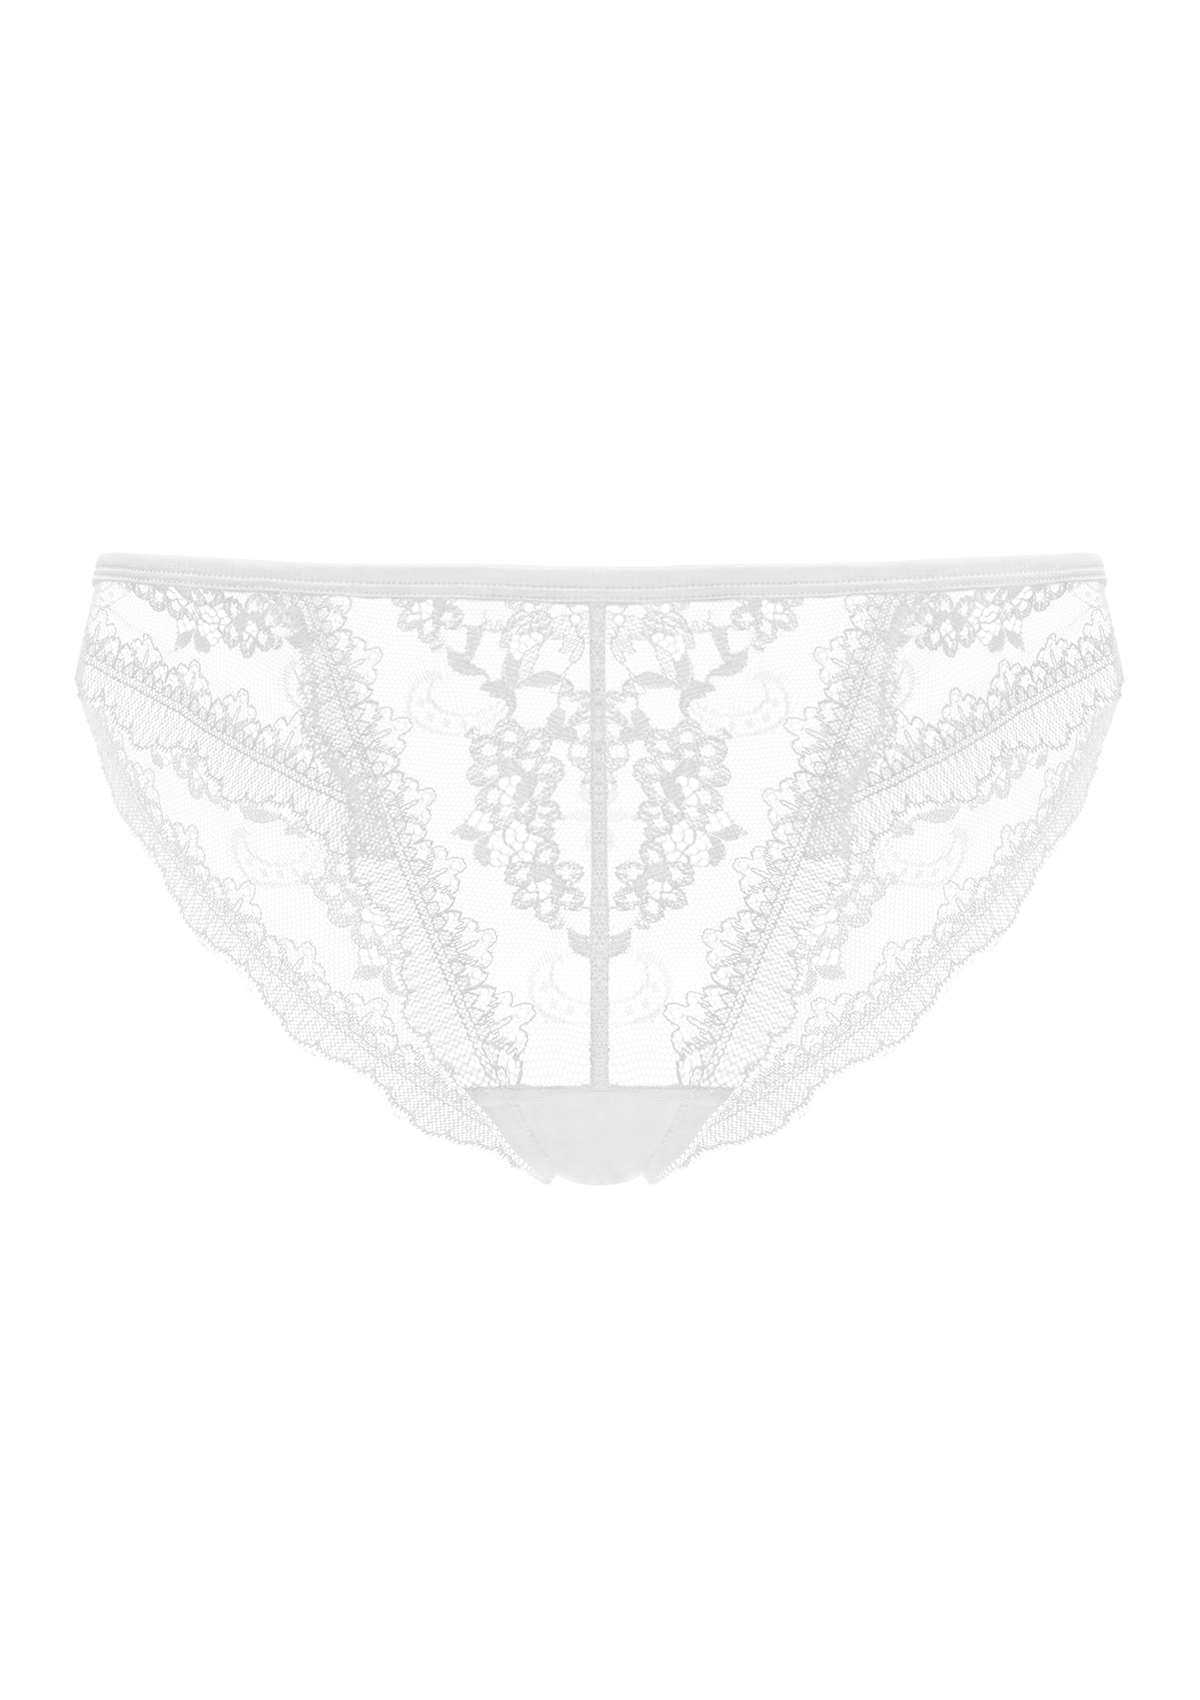 HSIA Floral Bridal Lace Back Intricate Stylish Cheeky Underwear  - White / XL